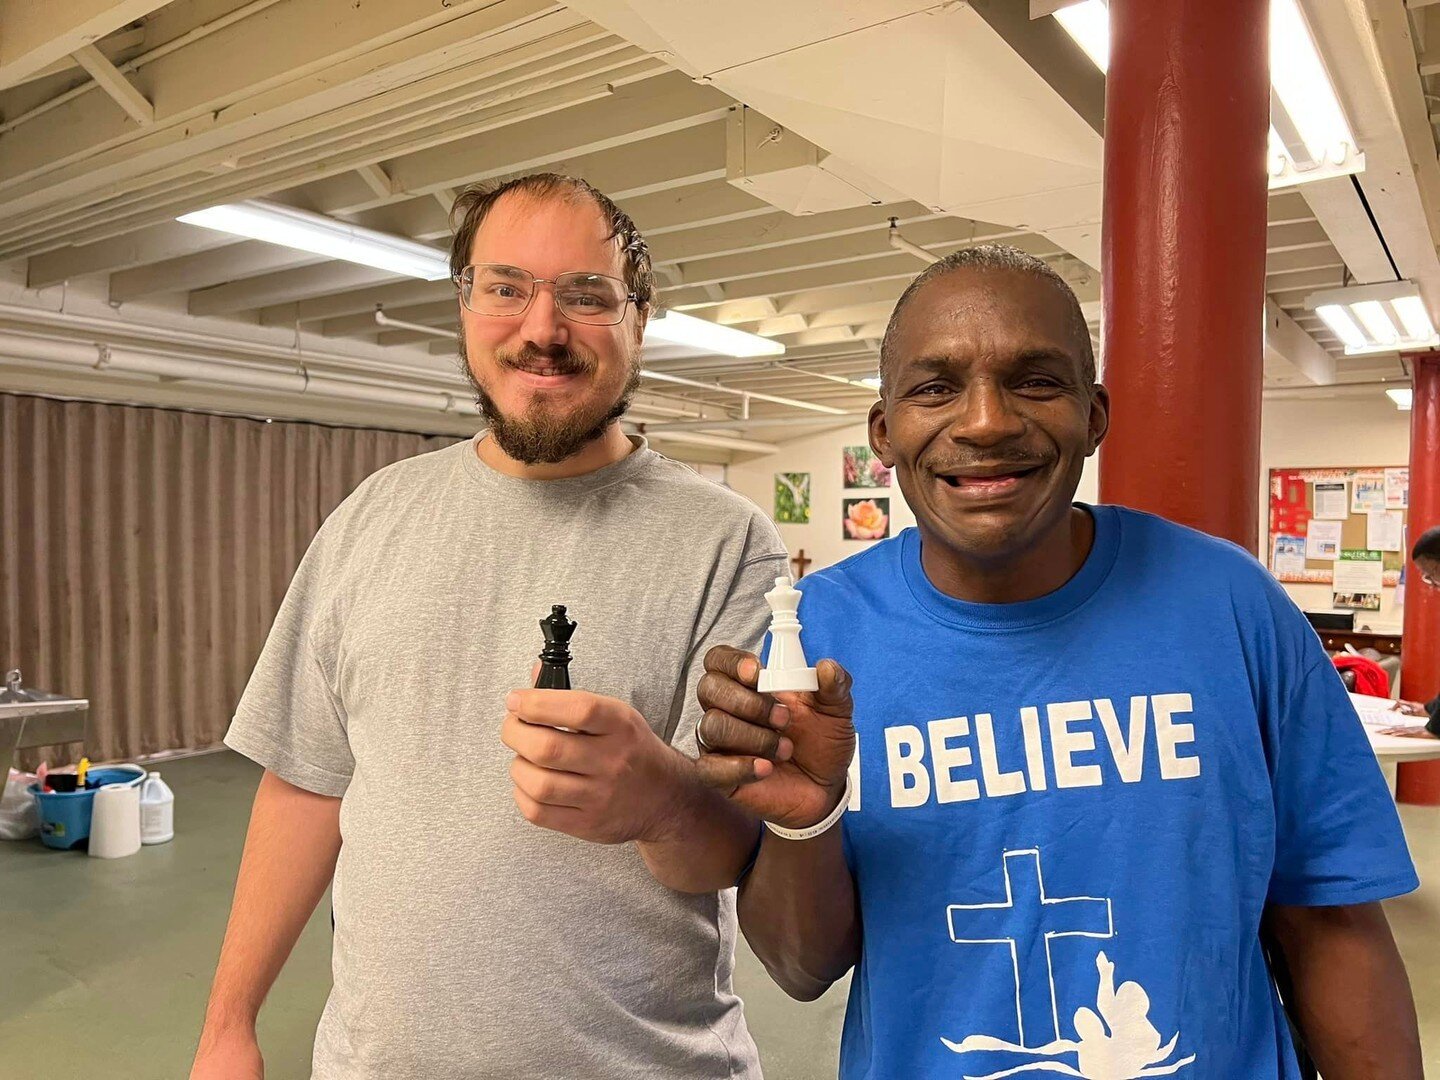 Life transformation for our Guests and Residents is the reason why we do what we do. We are happy to share that Andrew, pictured above on the left, will be starting a new job soon after spending time in Whosoever Gospel Mission&rsquo;s New Life Progr